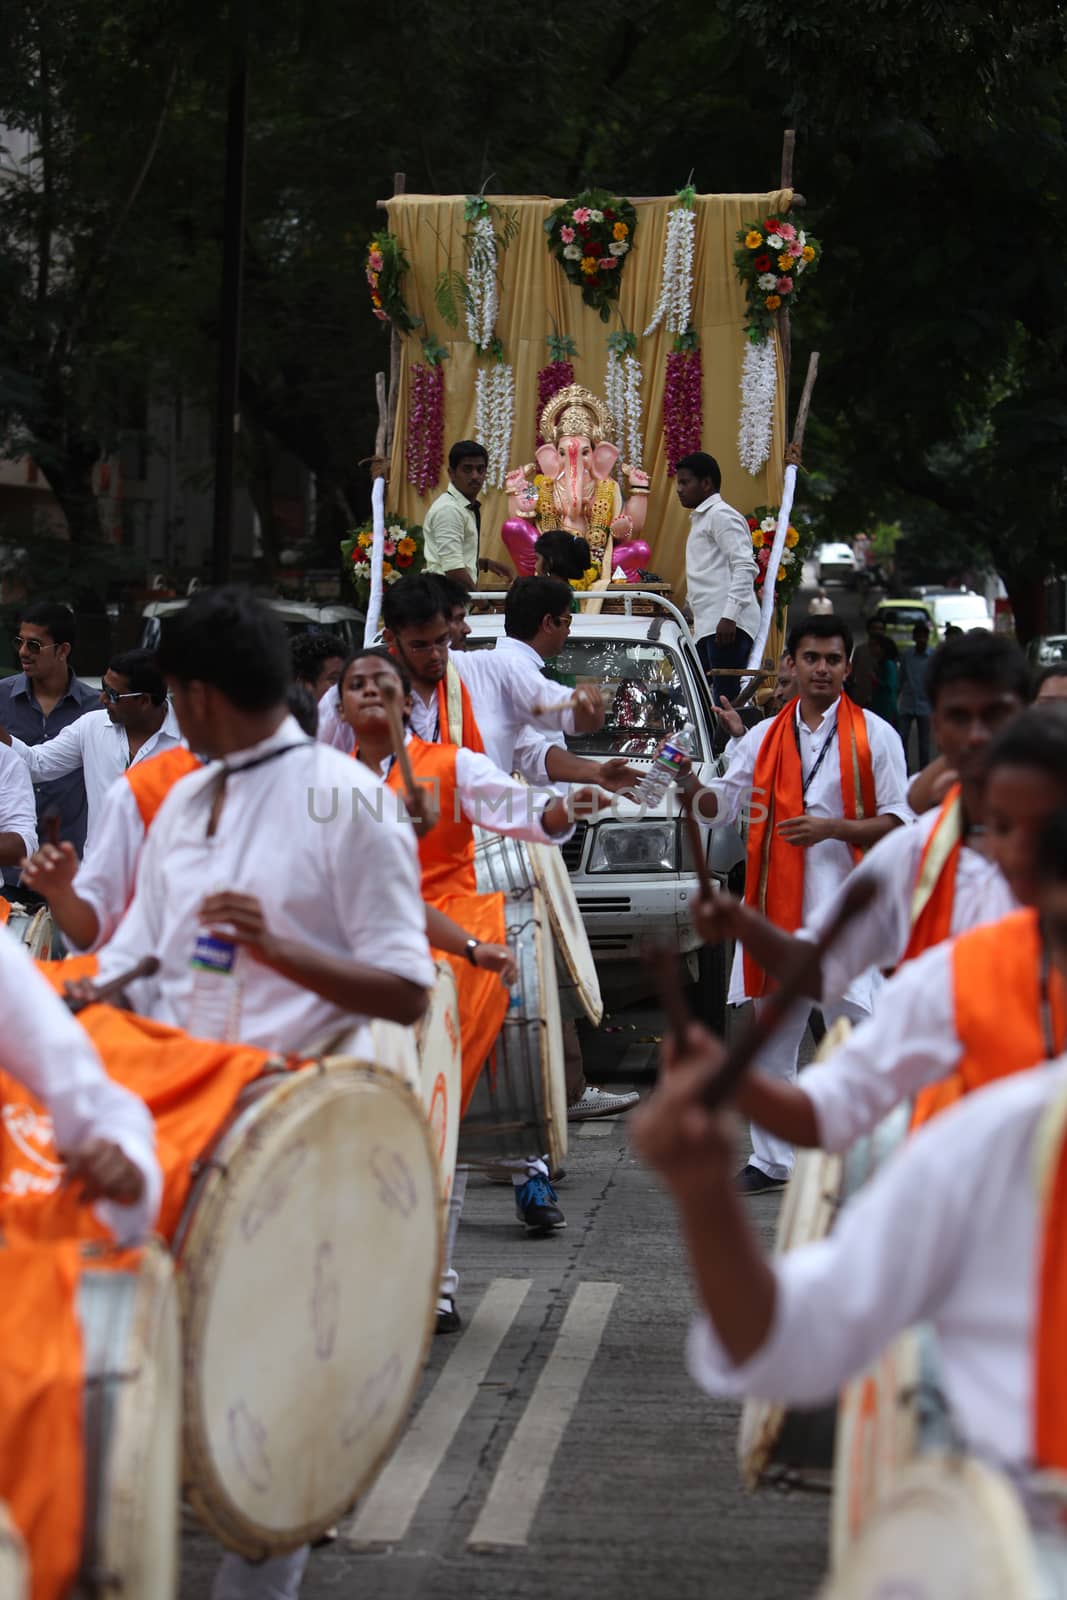 Pune, India - September 17, 2015: Ganesh festival procession being traditionally celebrated Dhol Tasha percussion and dancing.